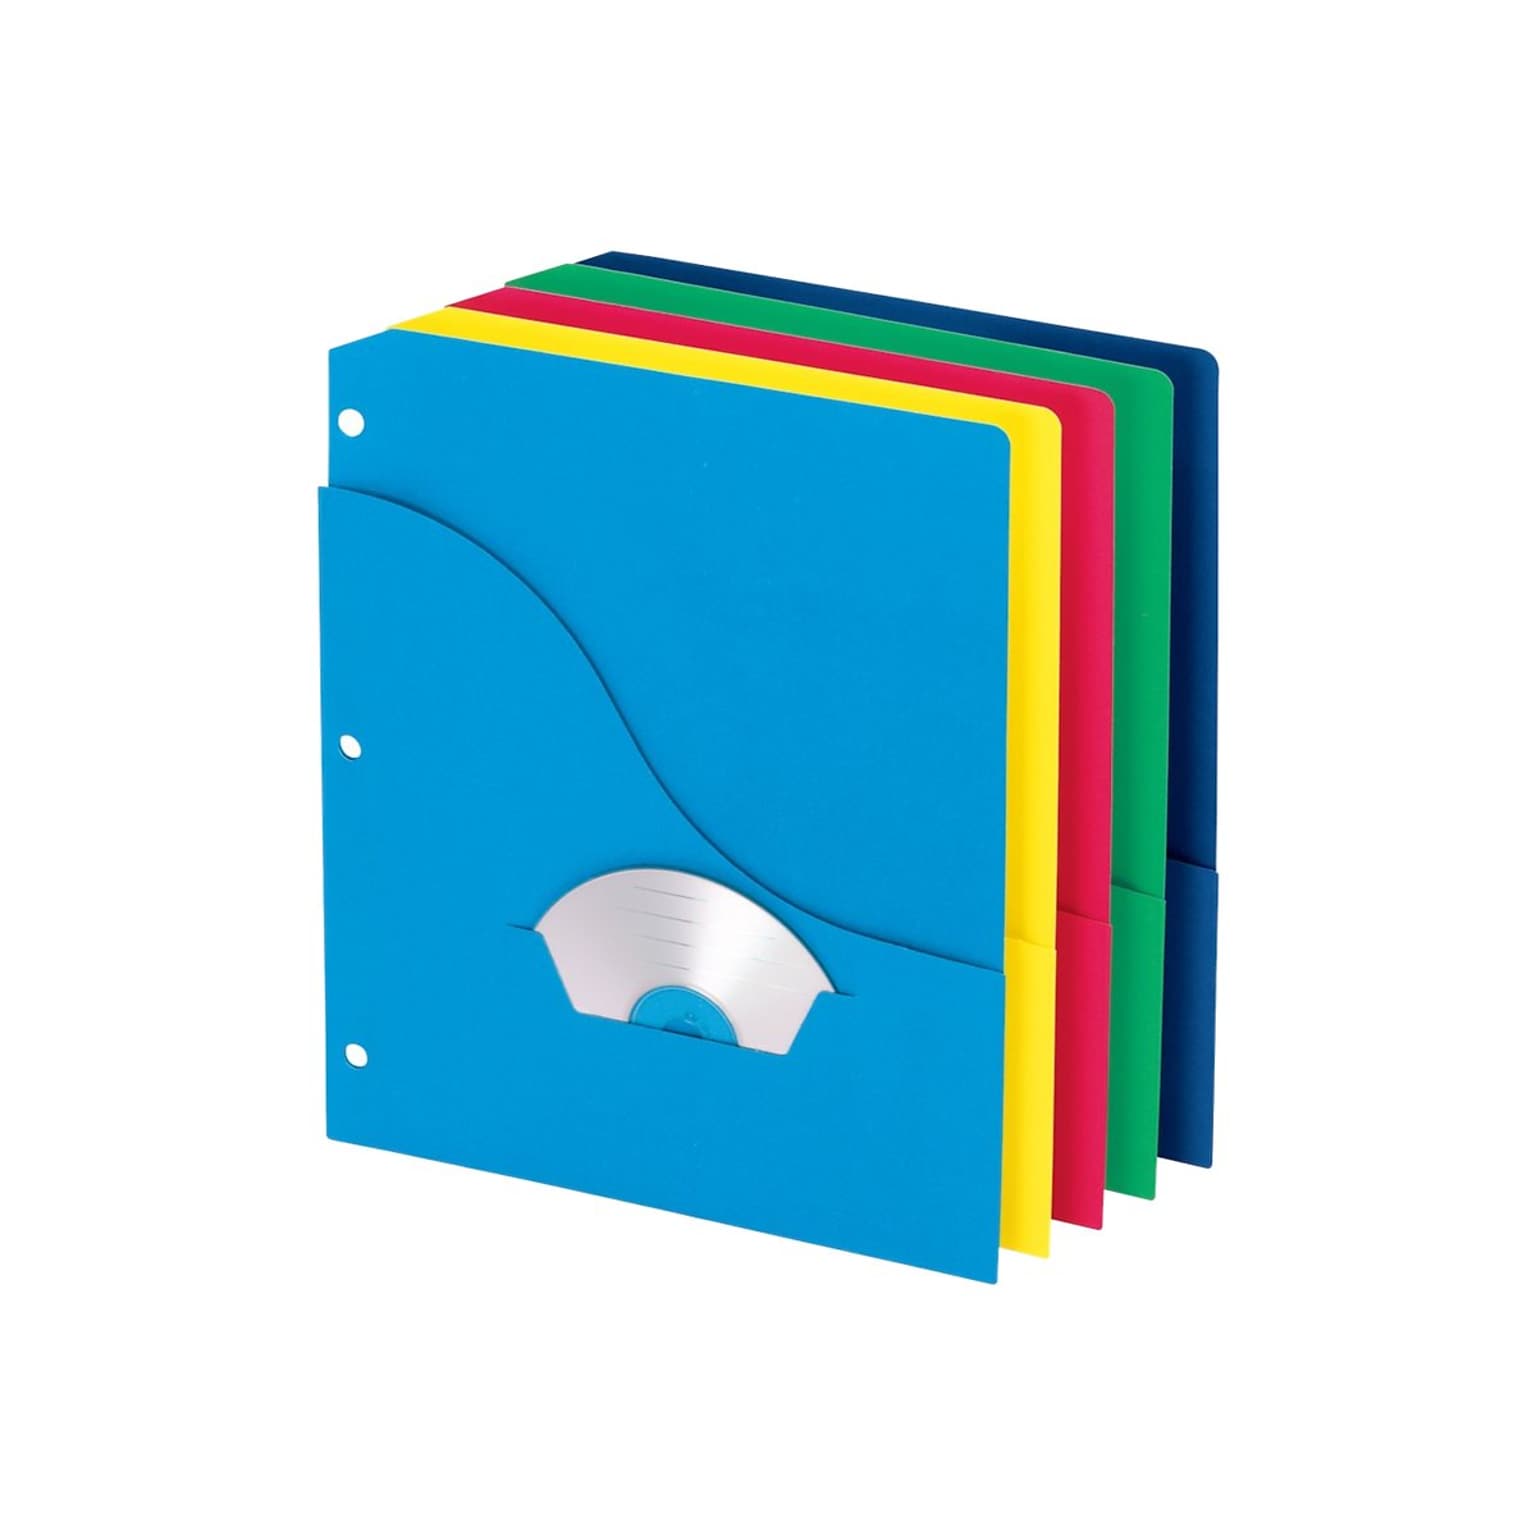 Pendaflex Paper Binder Pockets, 3-Hole Punched, Assorted Colors, 10/Pack (32900)